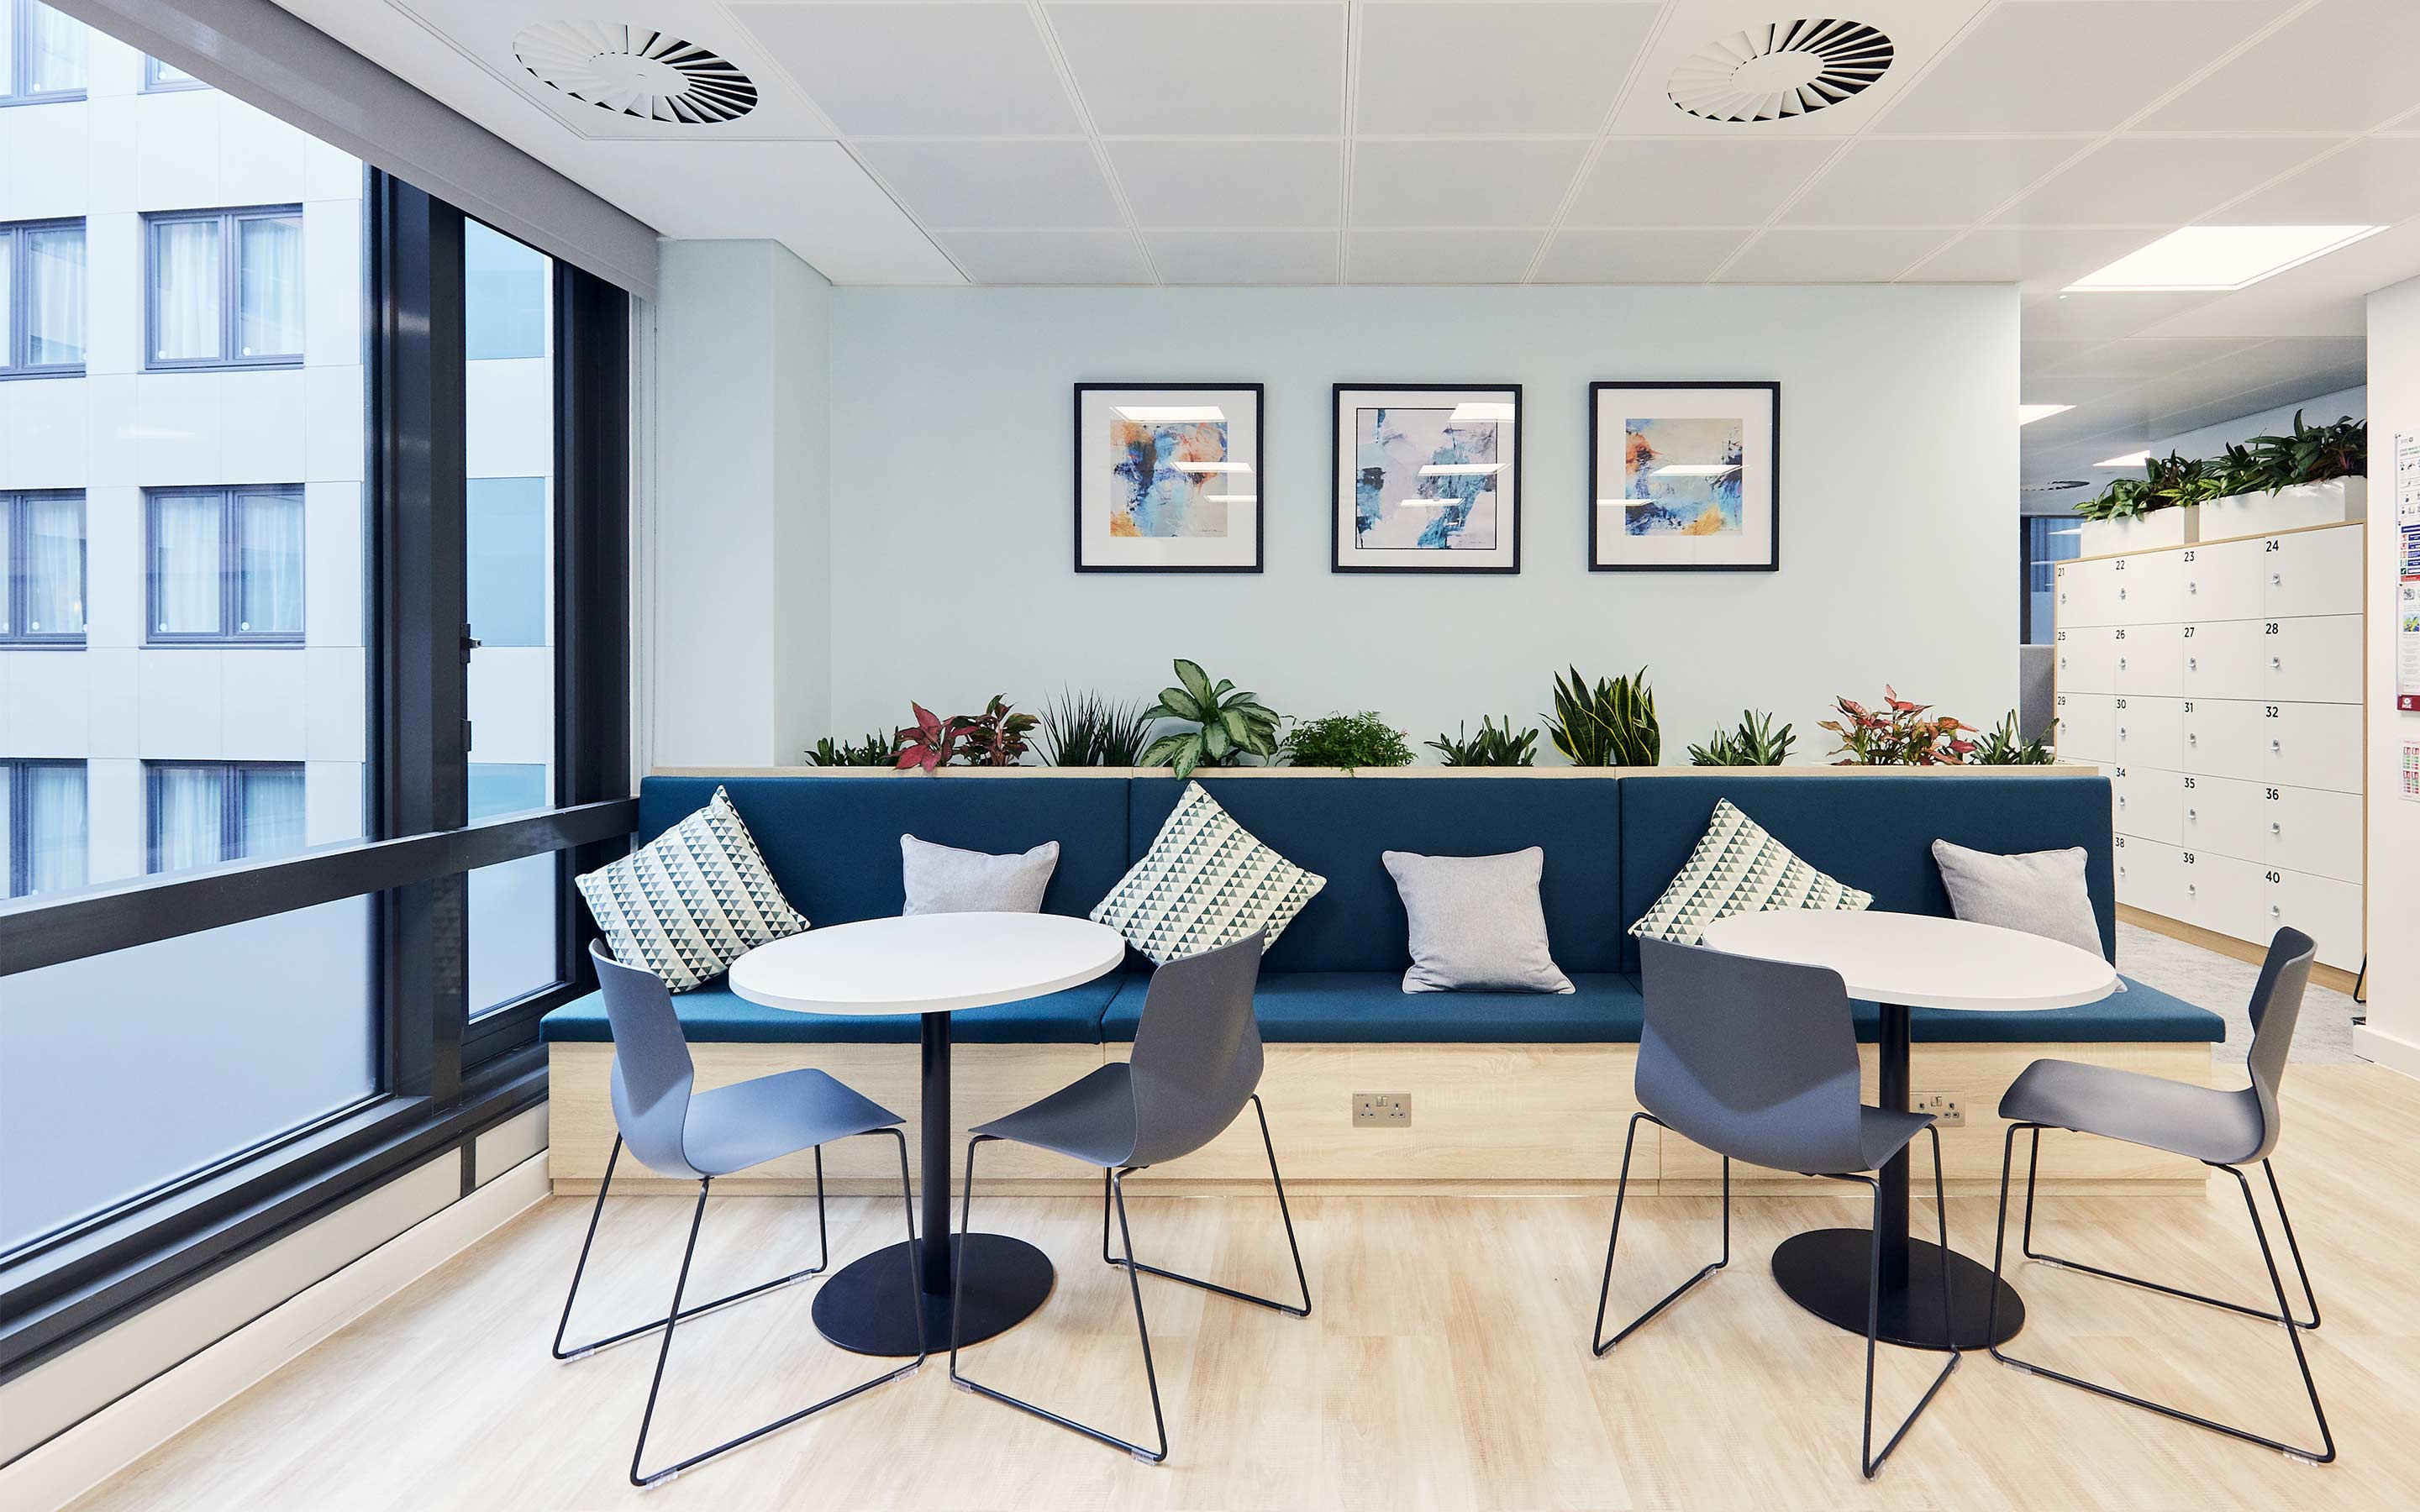 The image shows cafeteria seating in a bright office tea point. Artwork, indoor plants and light wooden flooring brightens up a banquette seating area